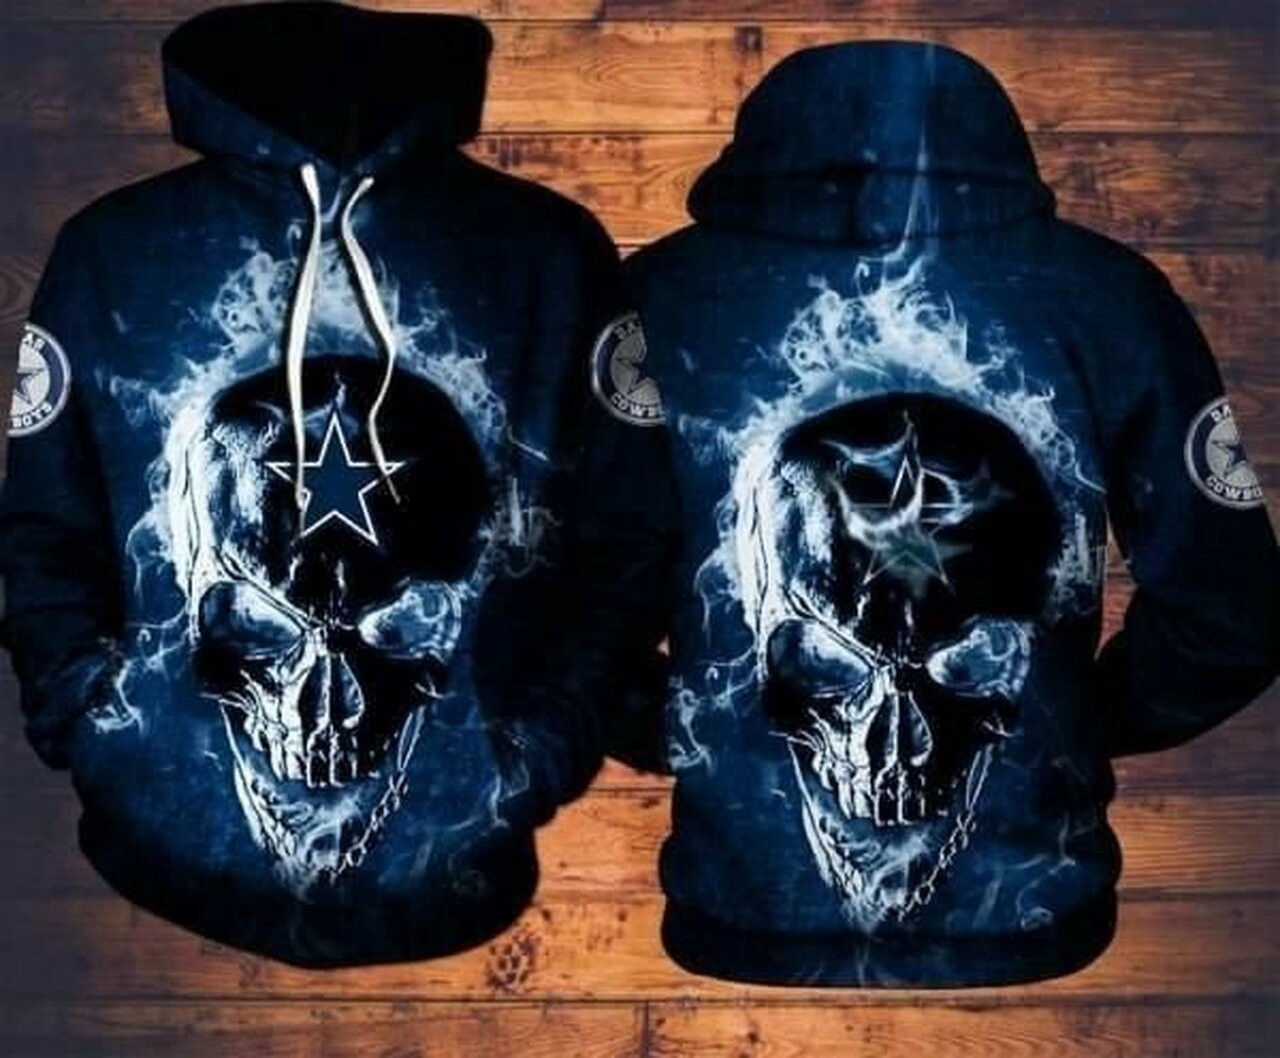 Dallas Cowboys Nfl Football Skull Fire Black Men And Women 3d Full Printing Pullover Hoodie And Zippered Dallas Cowboys 3d Full Printing Shirt 2020